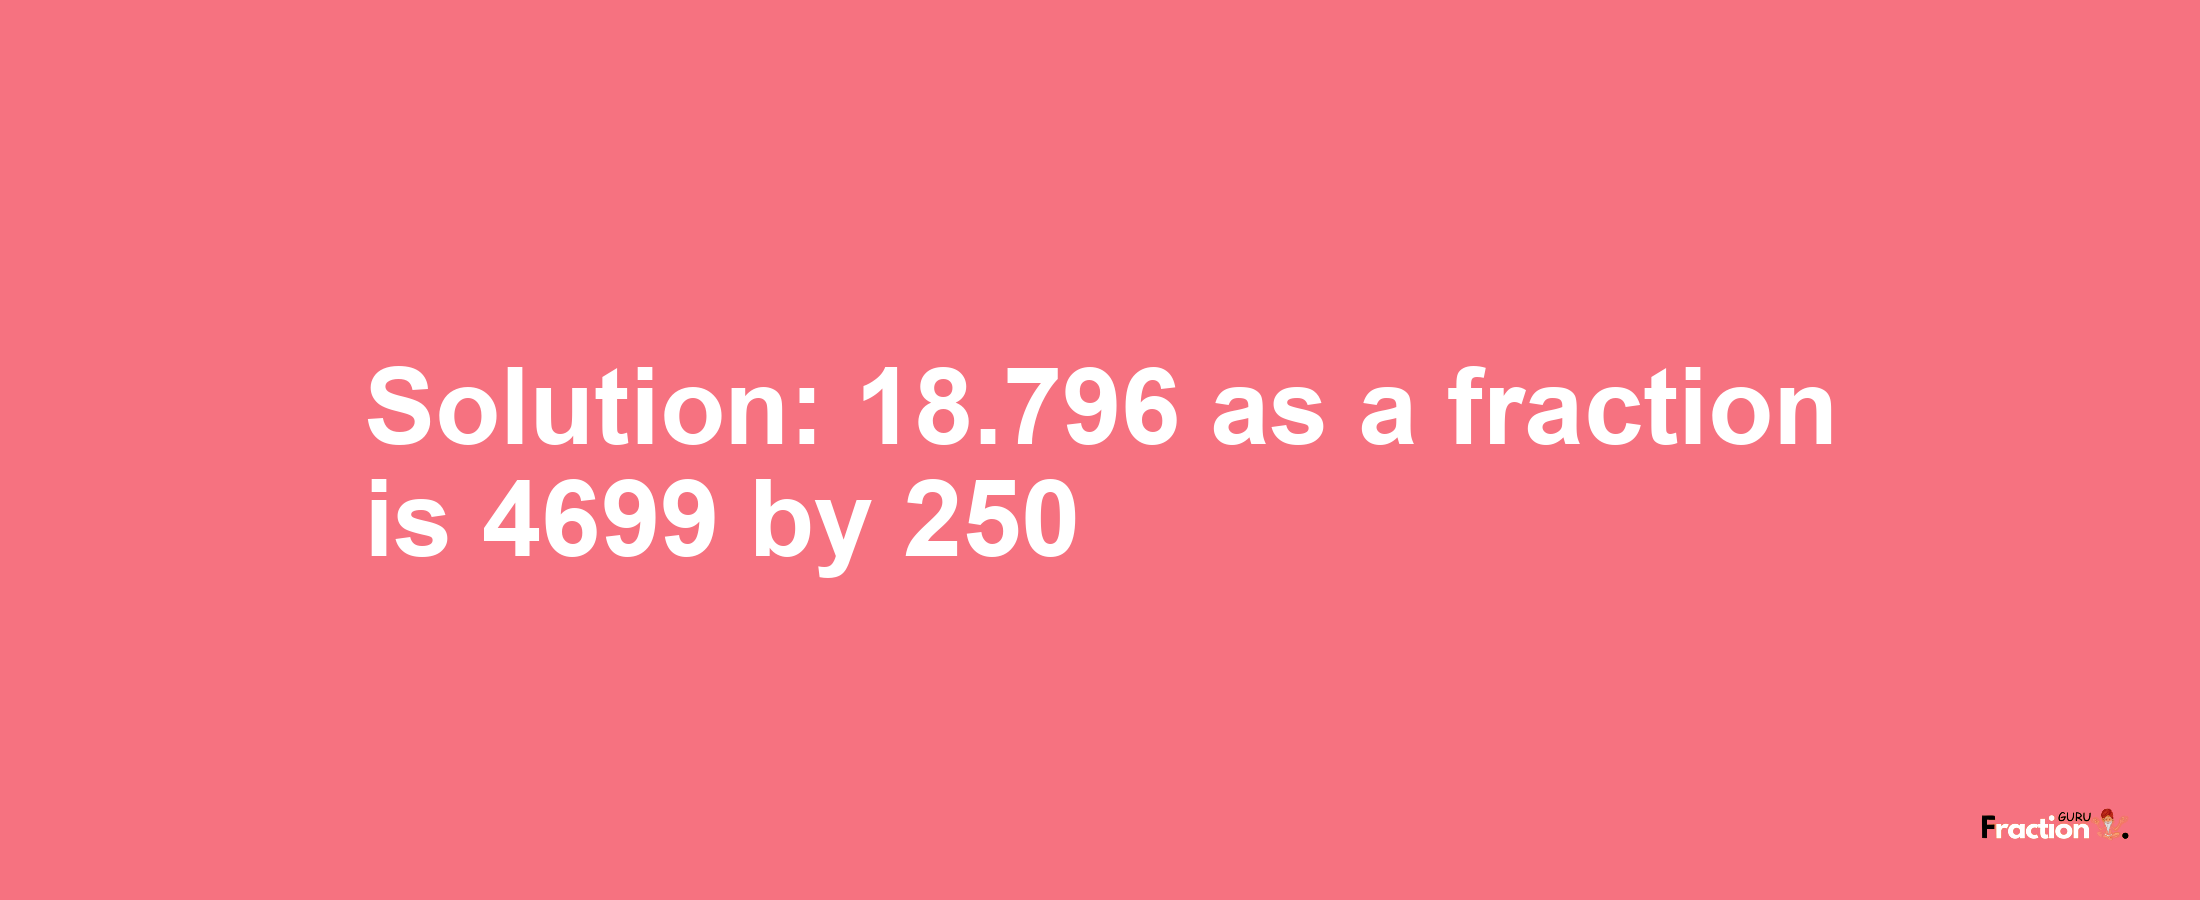 Solution:18.796 as a fraction is 4699/250